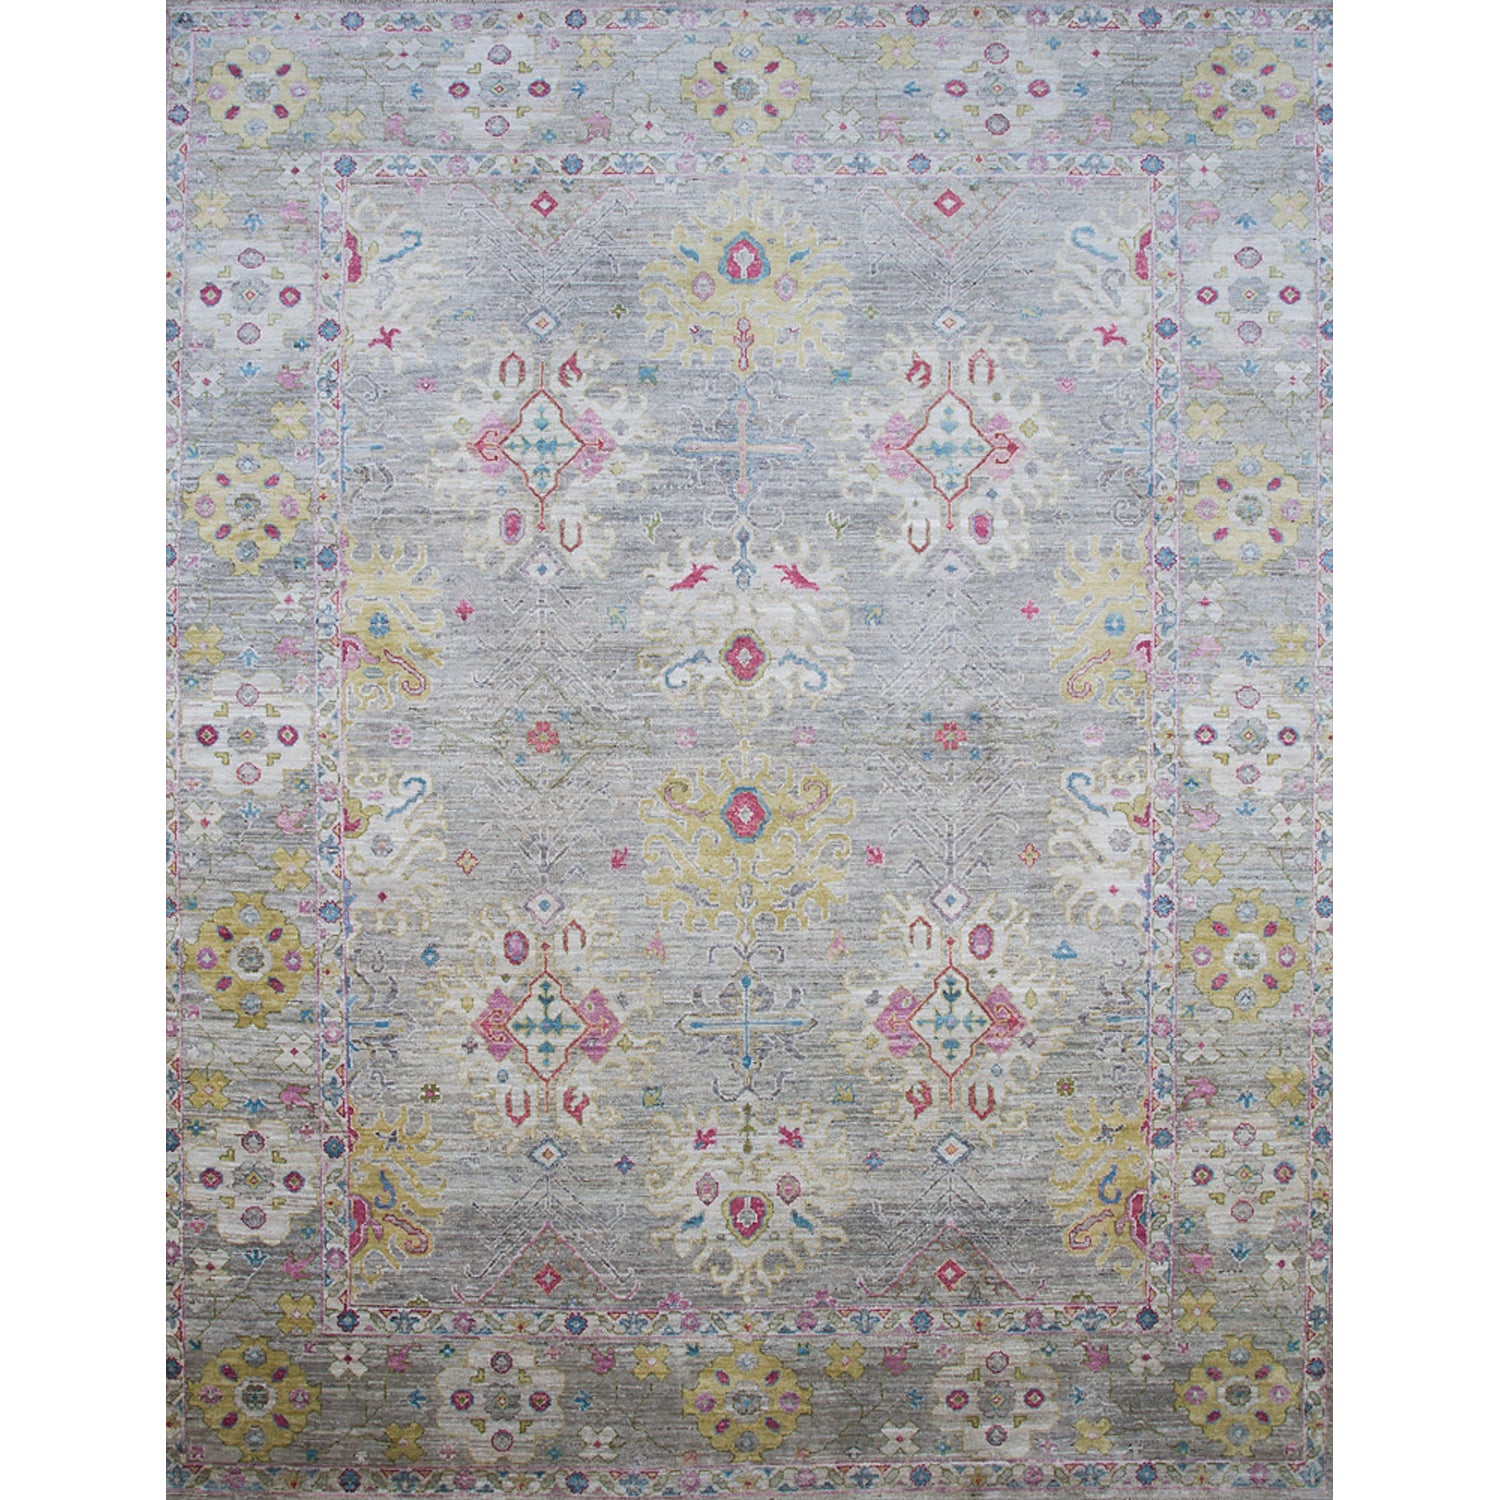 Large rectangular rug in an abstract floral pattern with a repeating floral border print in shades of pink, yellow and red on a mottled gray field.